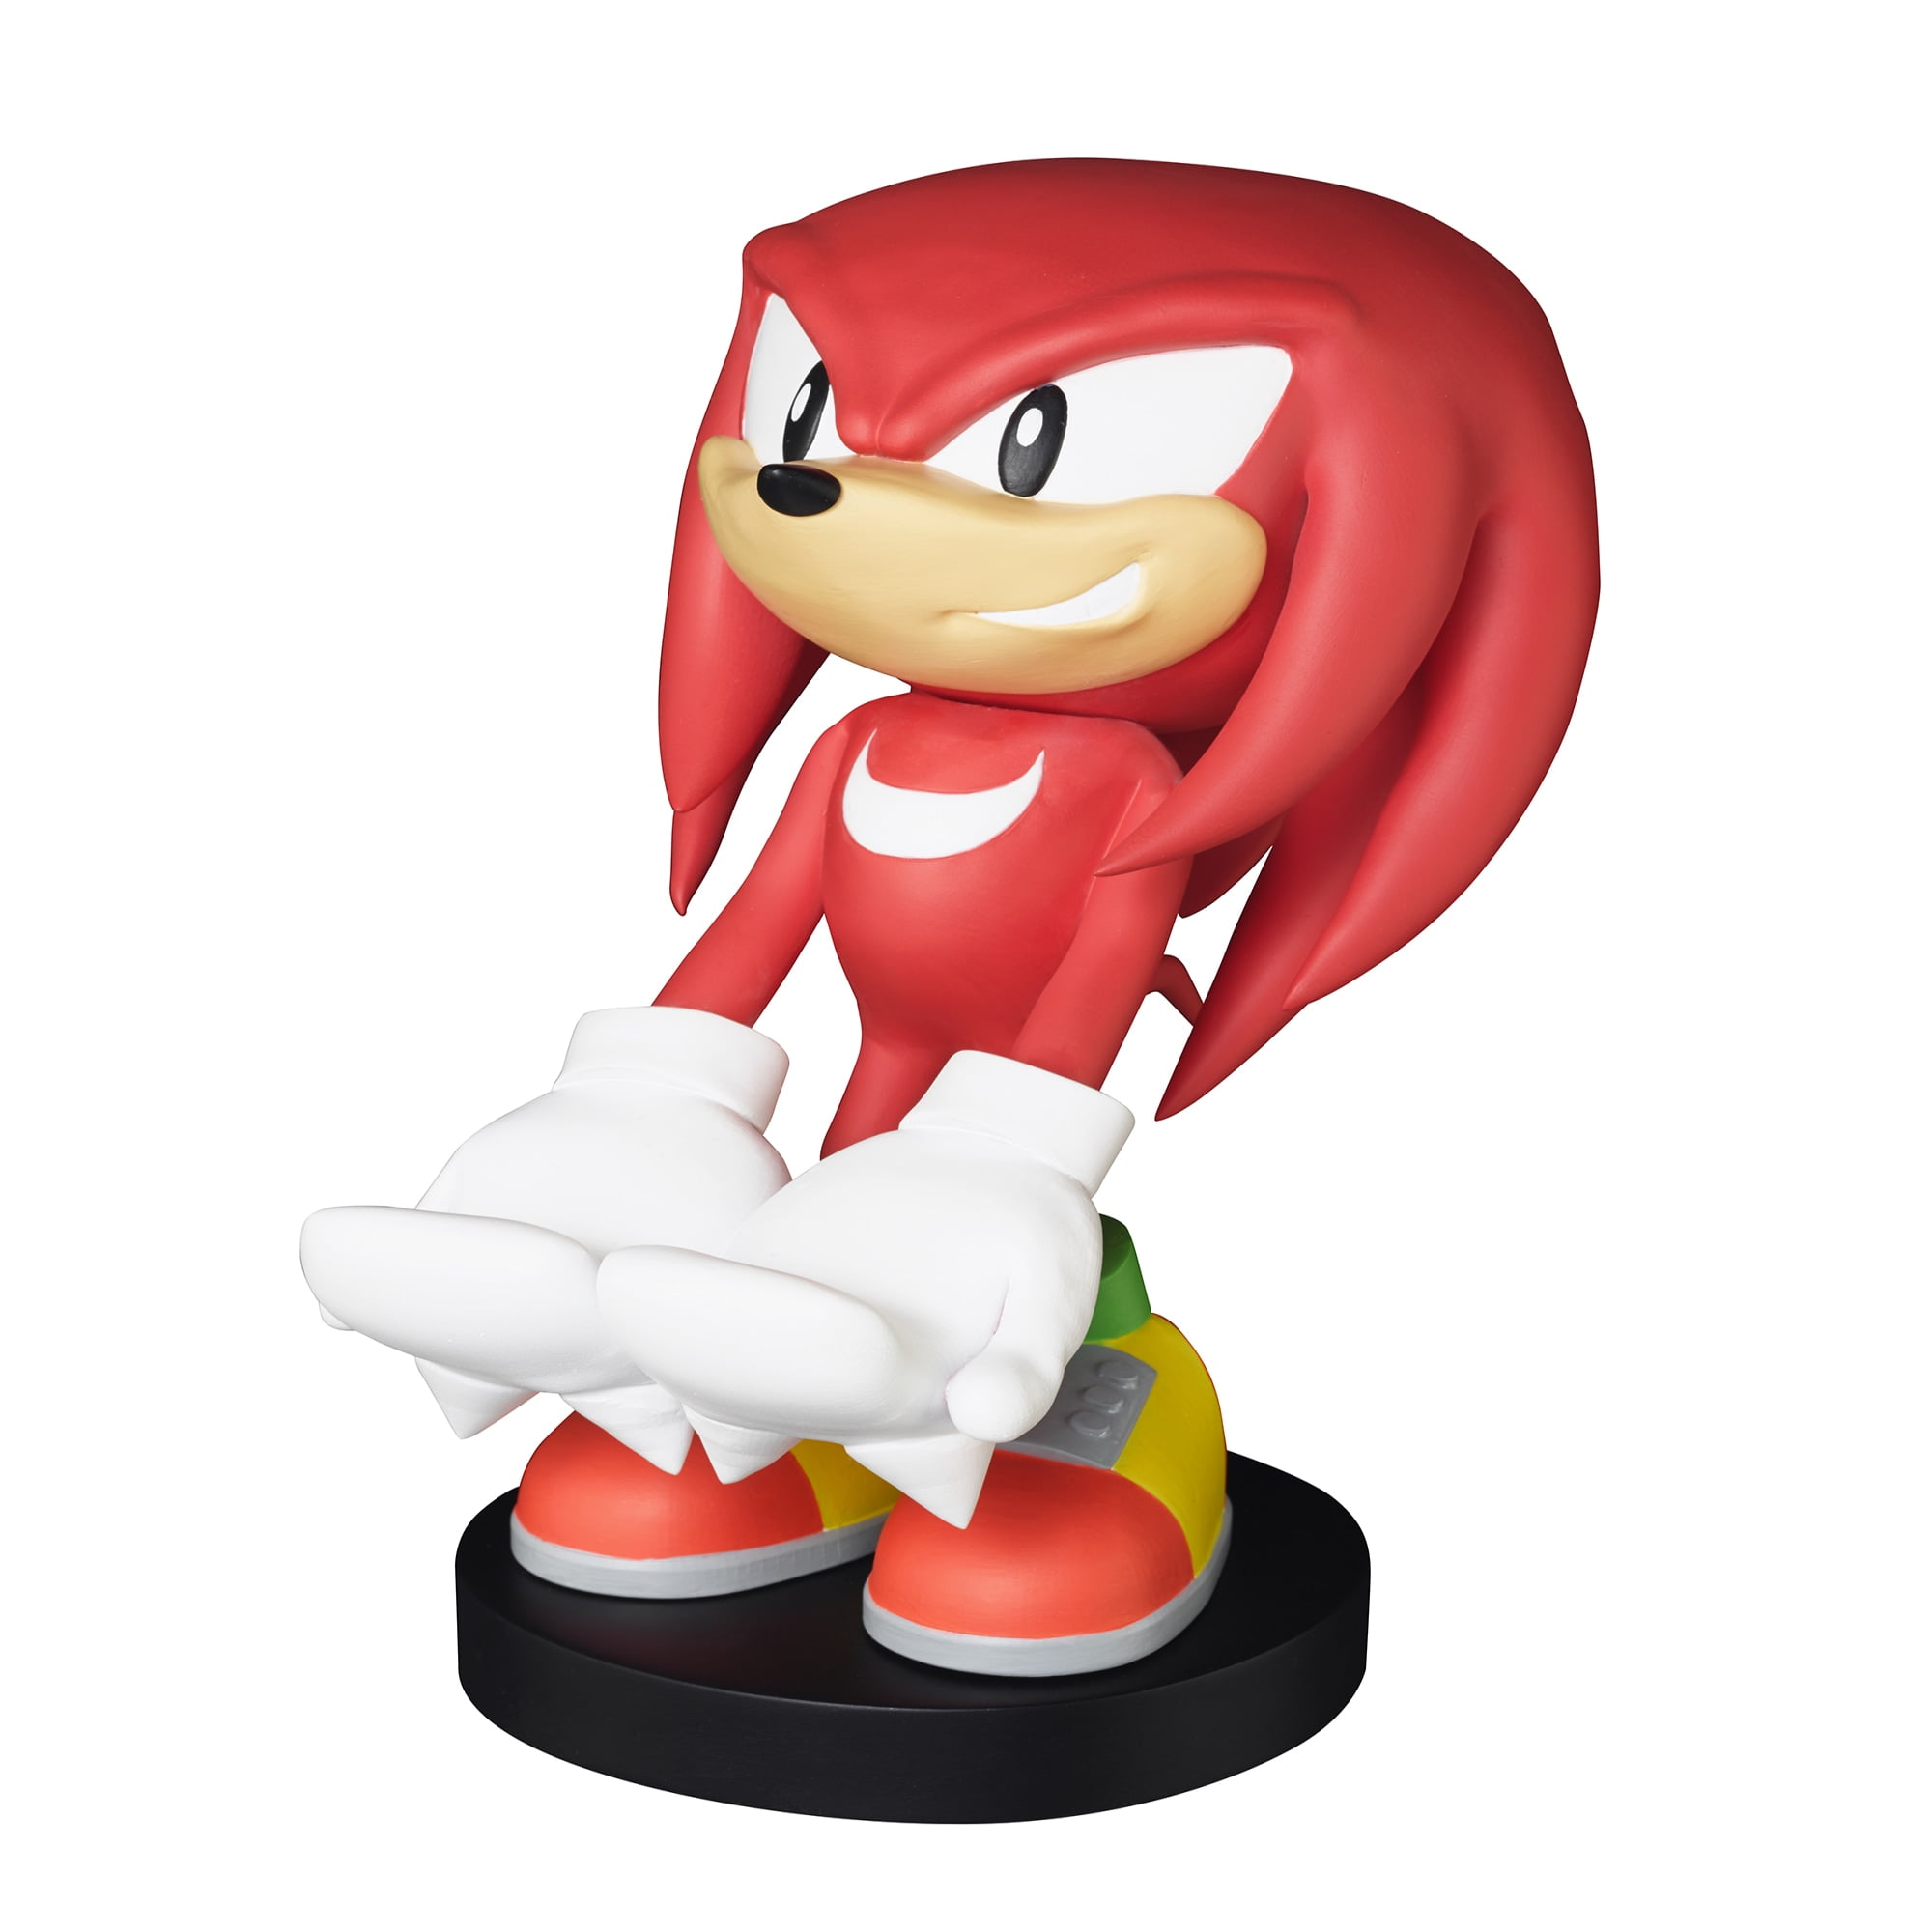 Figurine Support manette Knuckles - Exquisite games - 73990008468